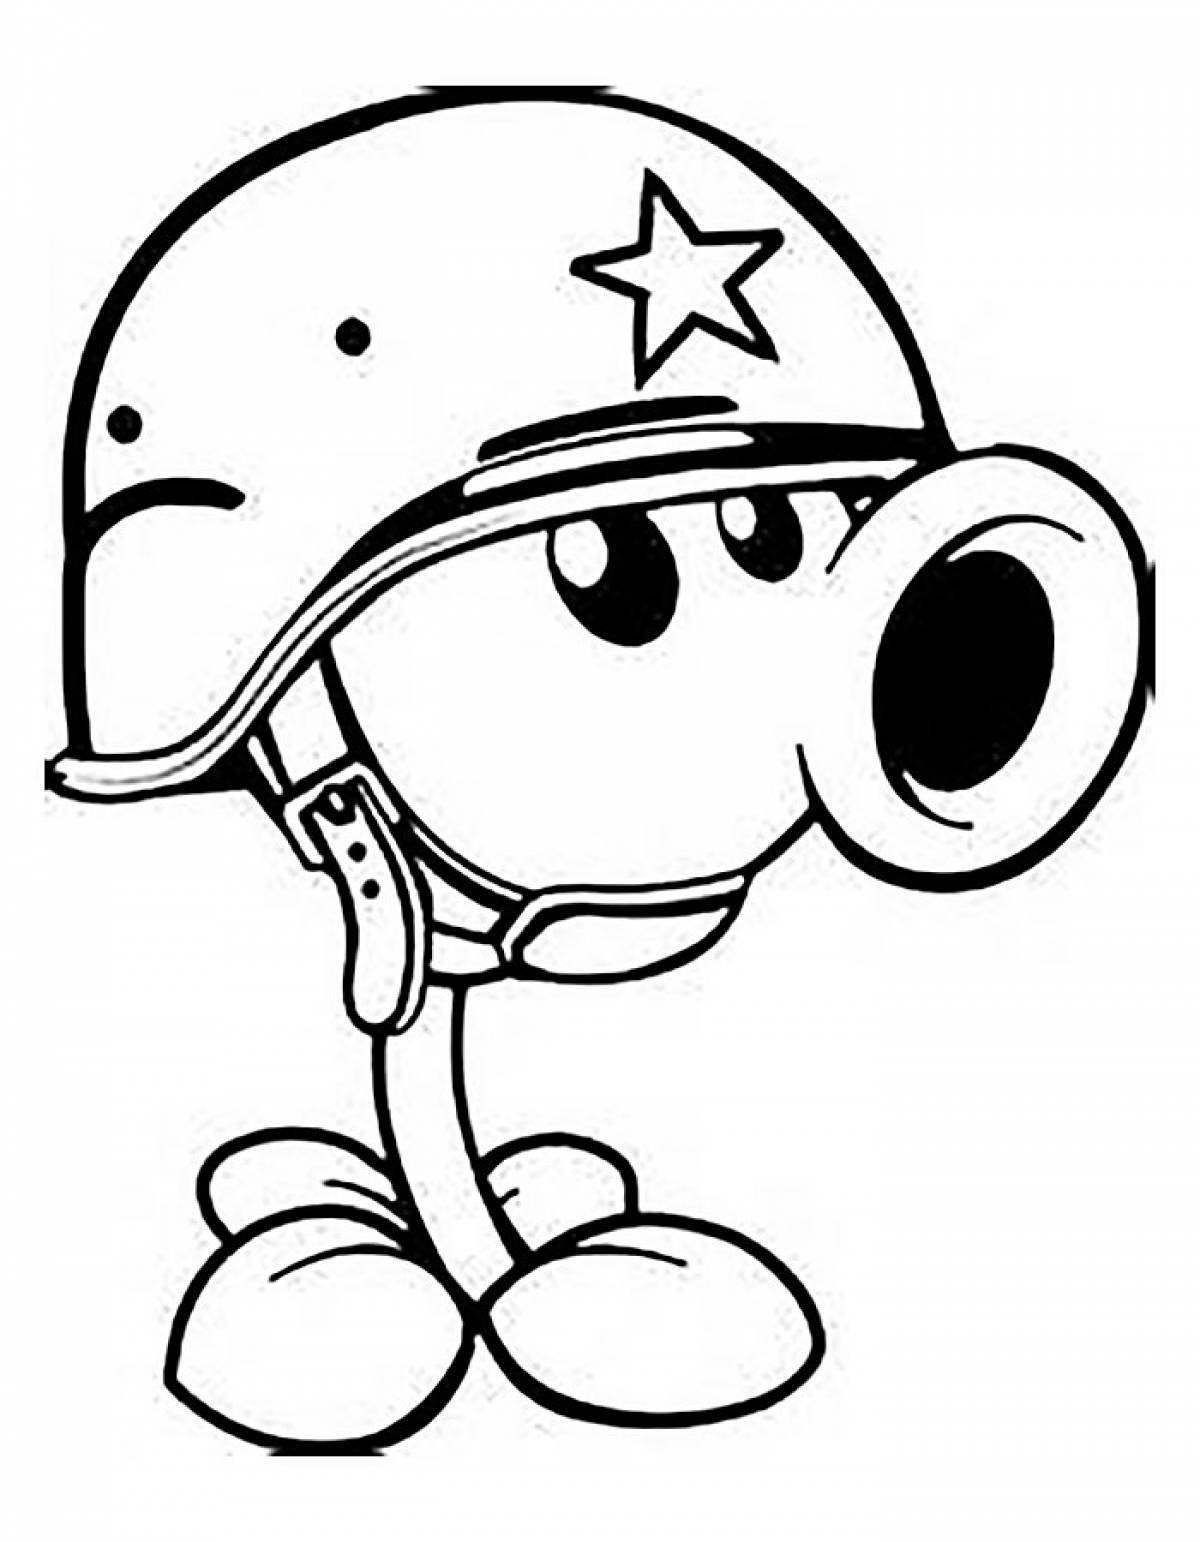 Pea Shooter coloring page